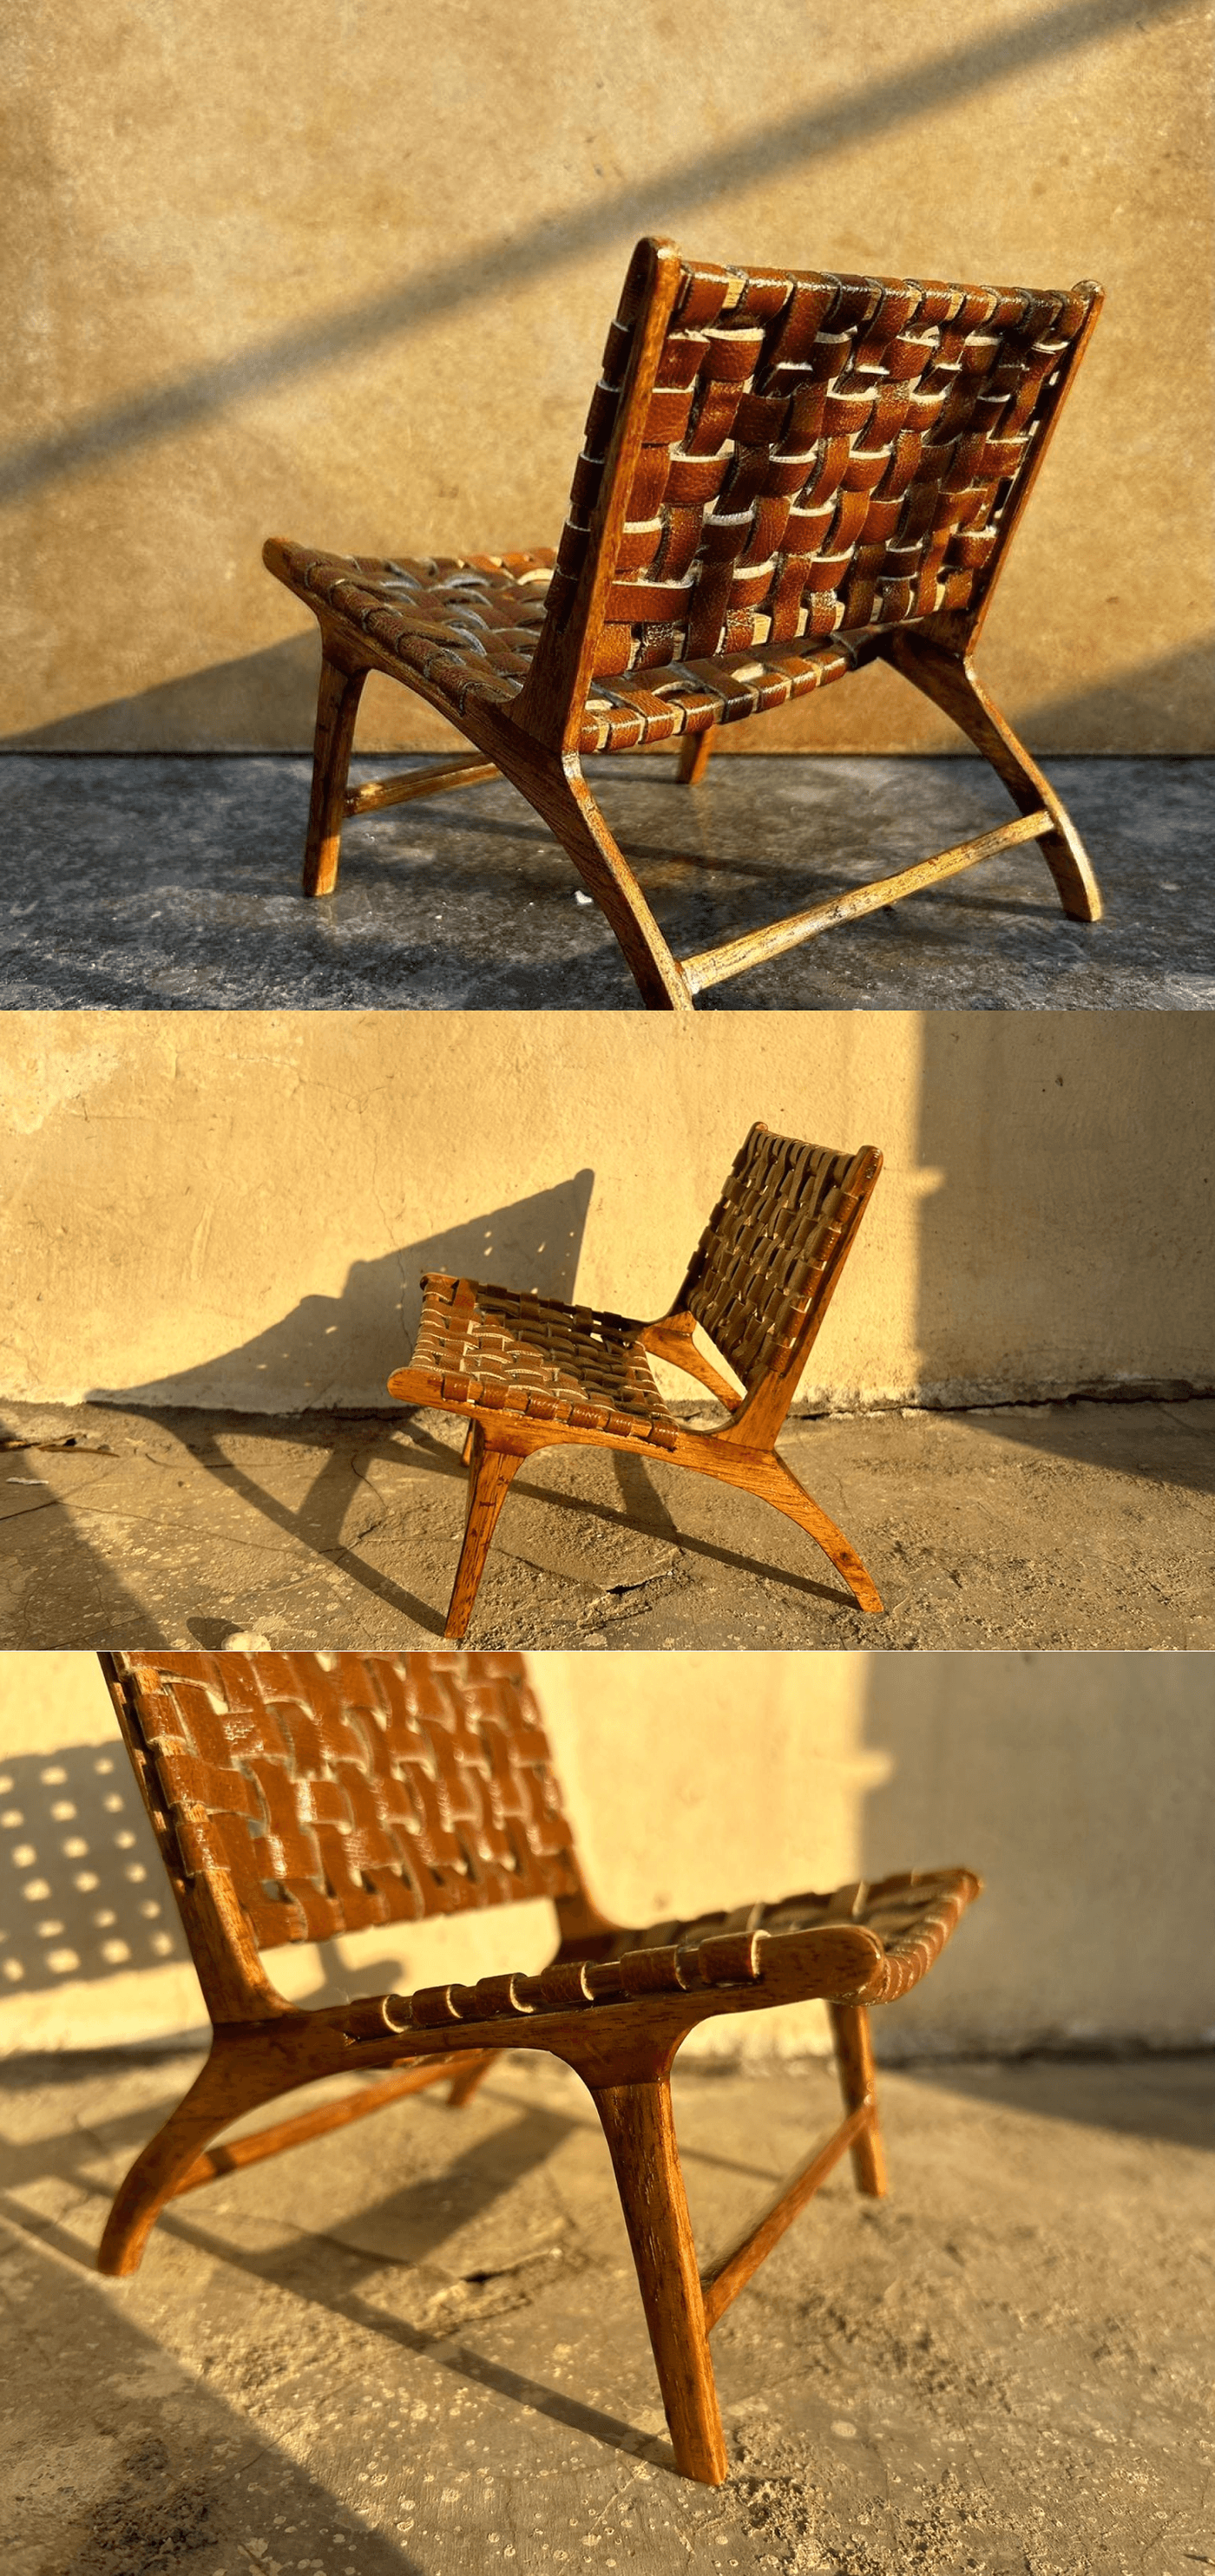 furniture furniture design  woodworking weaving leather Miniature miniatures Workshop chair Woven